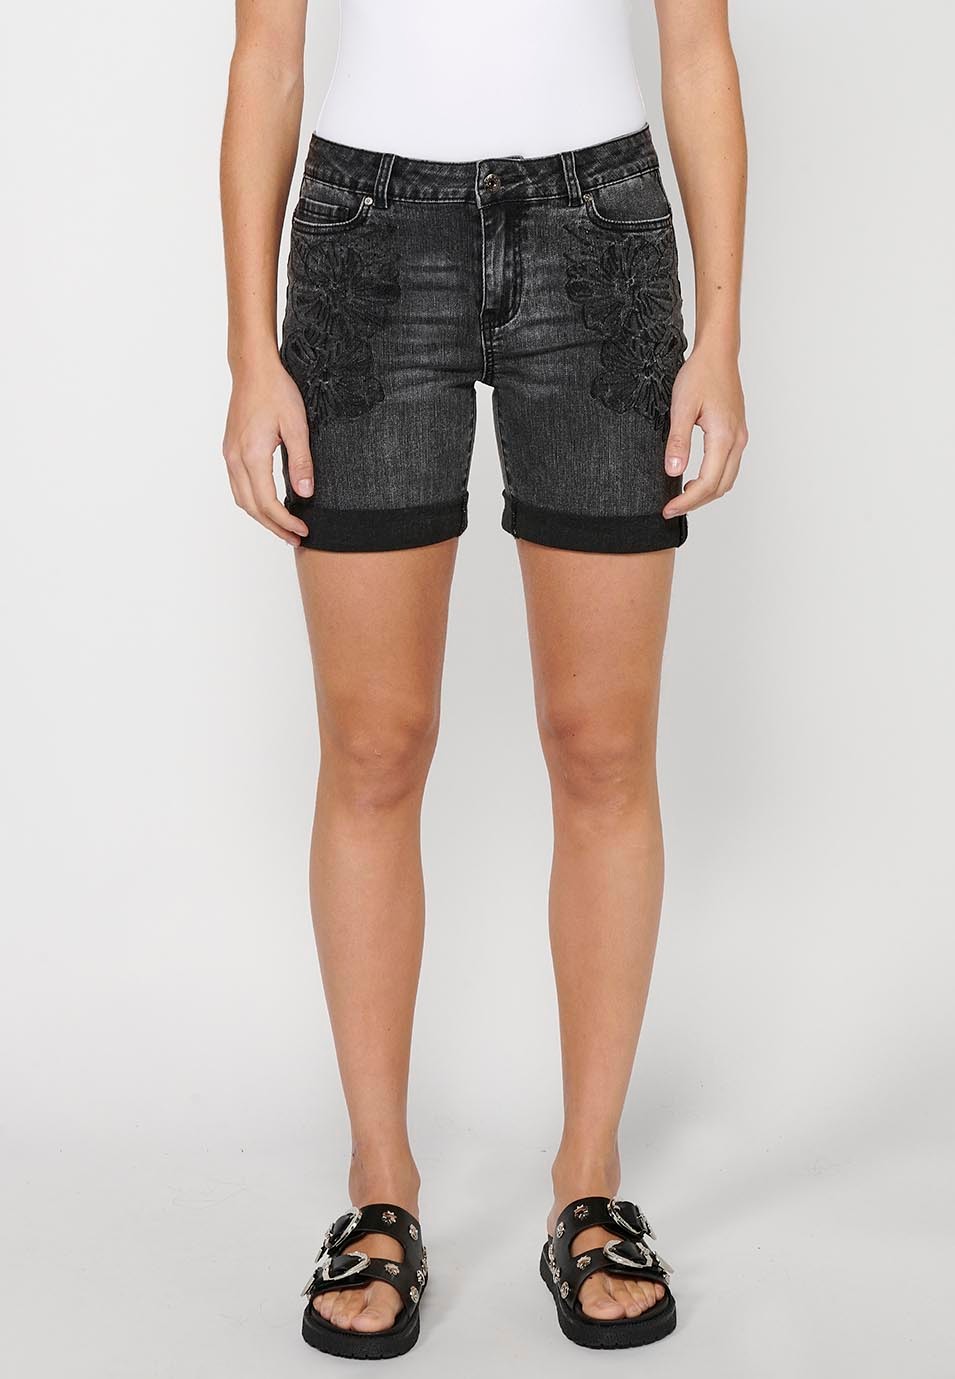 Shorts with a turn-up finish with front closure with zipper and button and floral embroidery in Black for Women 4